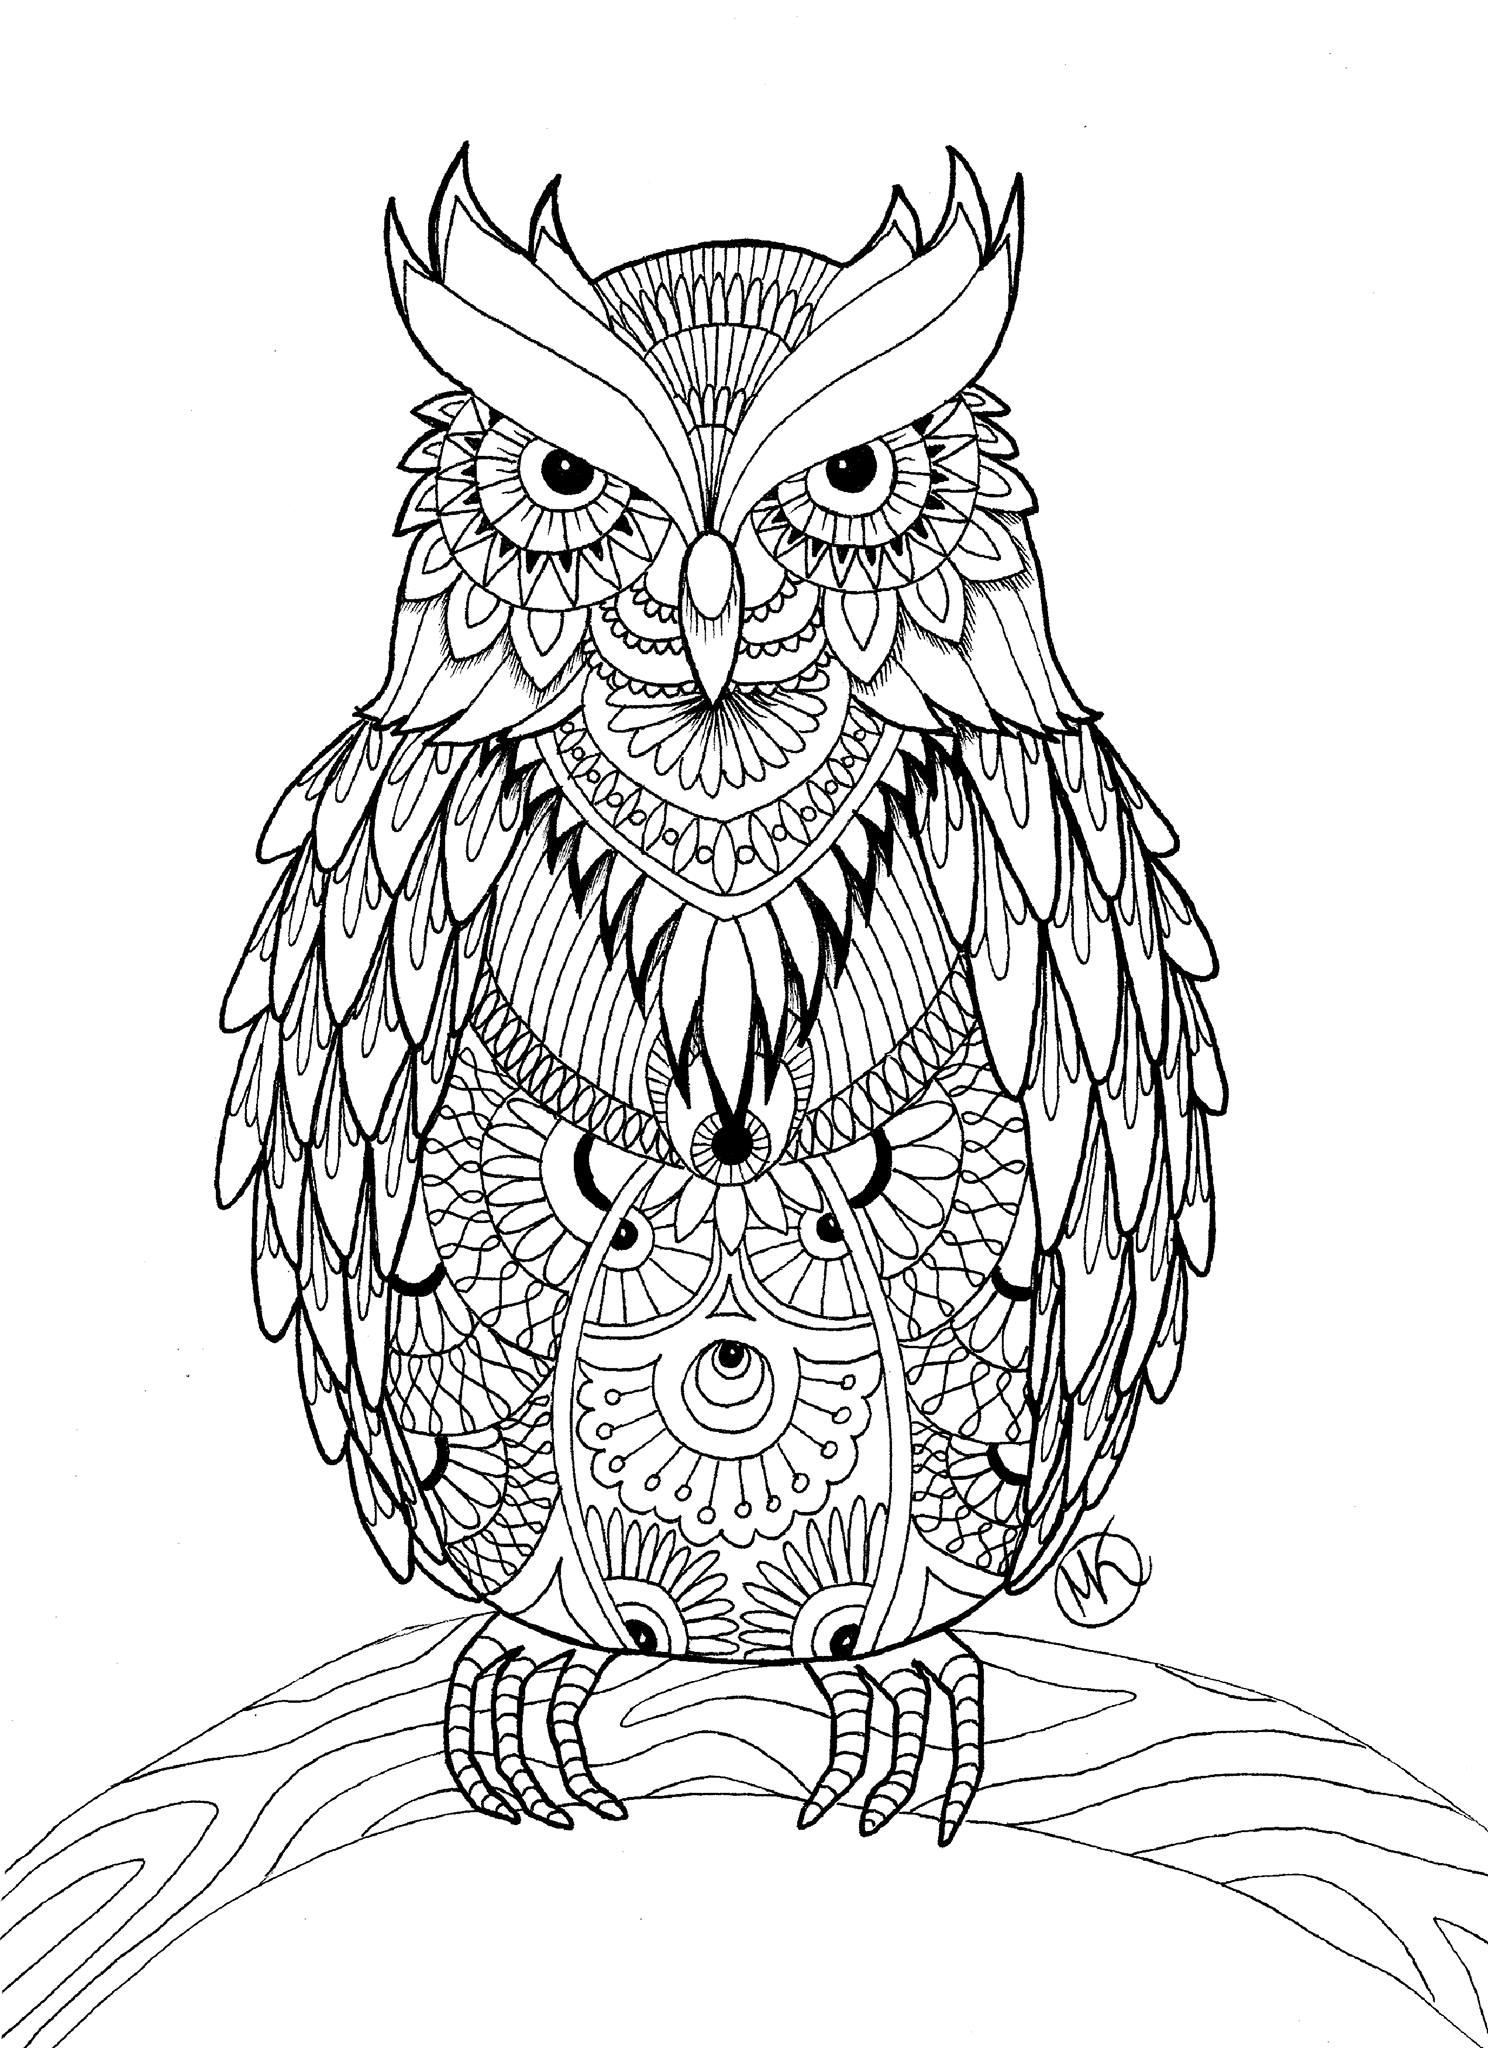 owl coloring page adult owl coloring page getcoloringpagescom owl coloring page 